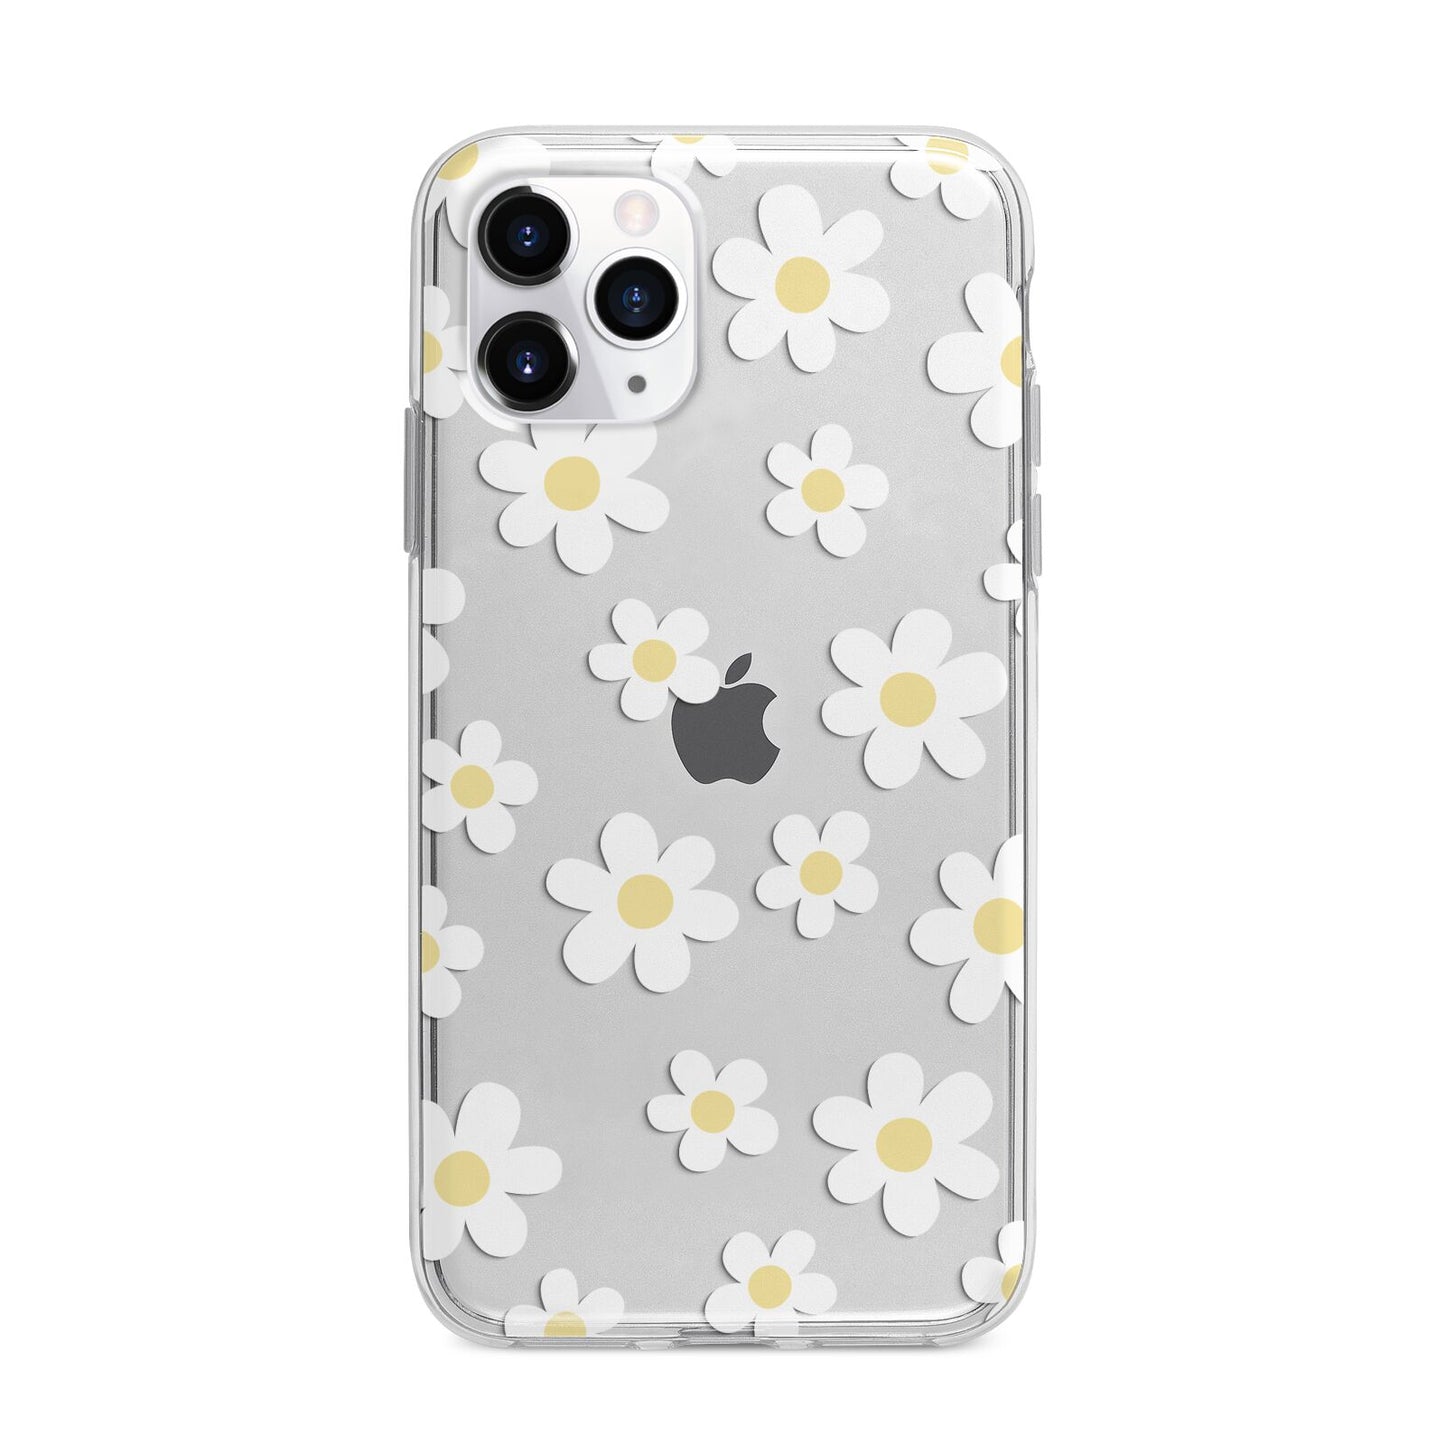 Daisy Apple iPhone 11 Pro Max in Silver with Bumper Case